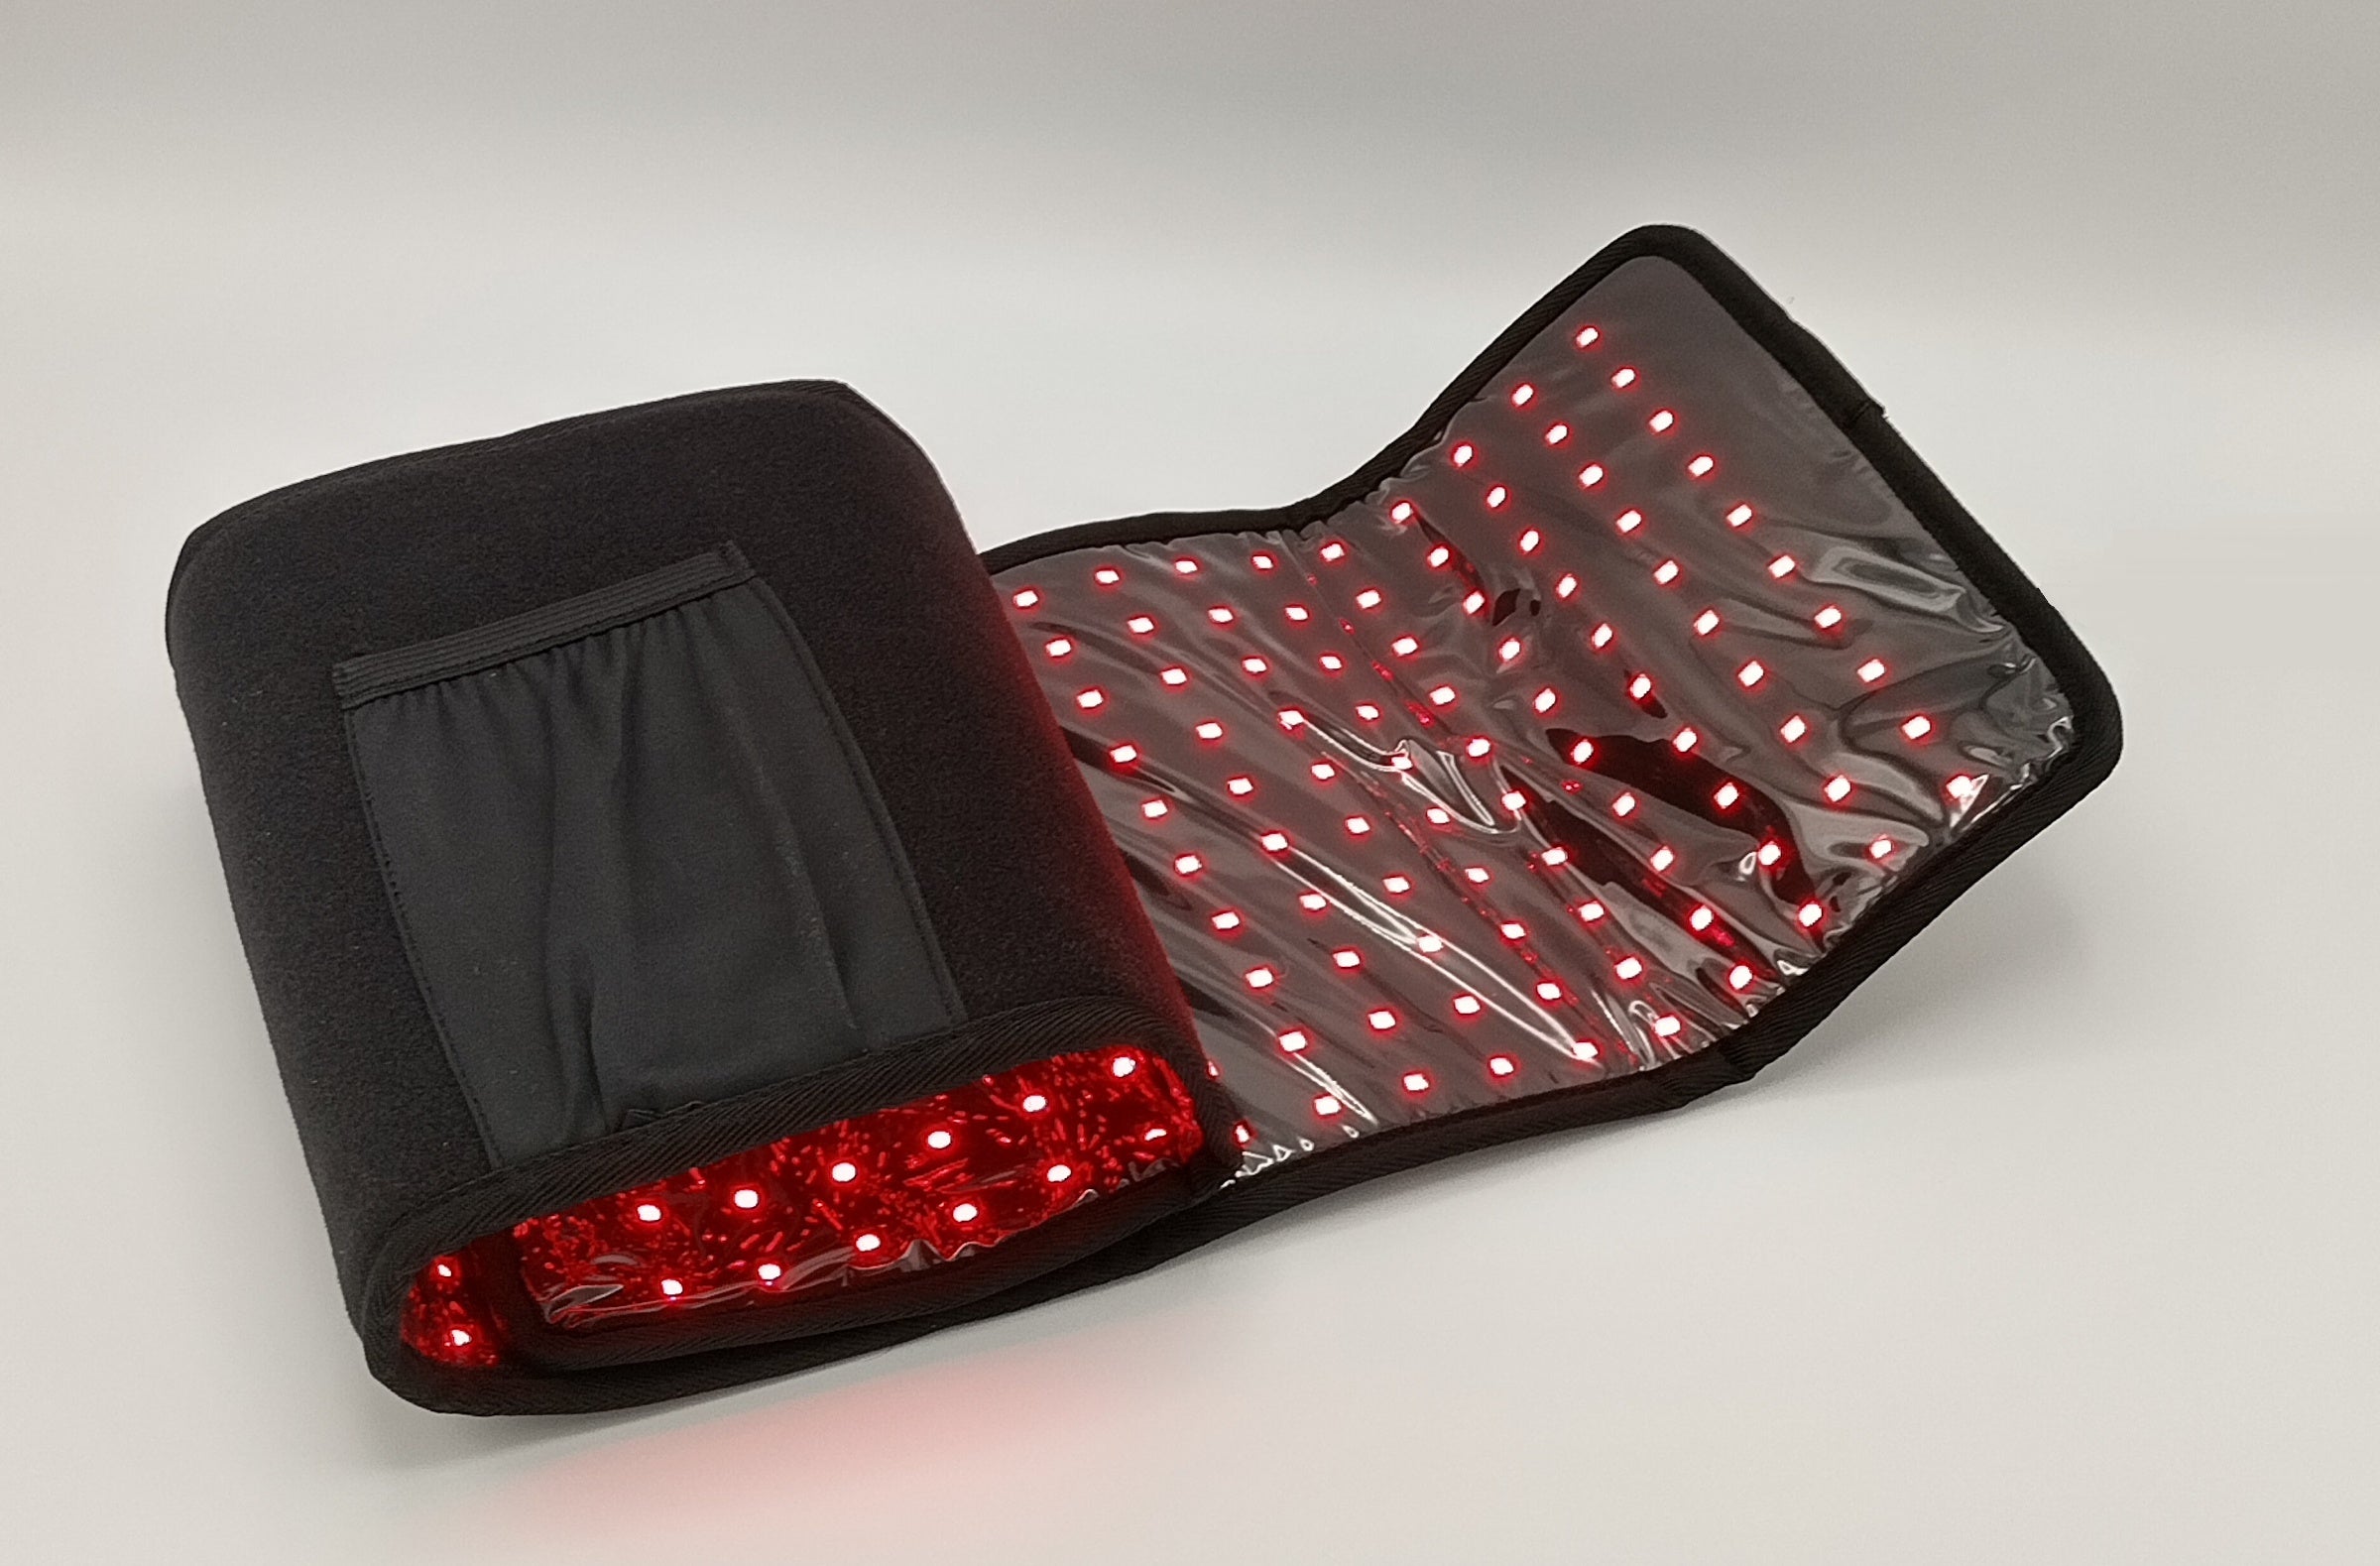 Light therapy flex pad with PVC cover for fat loss and cellulite reduction.